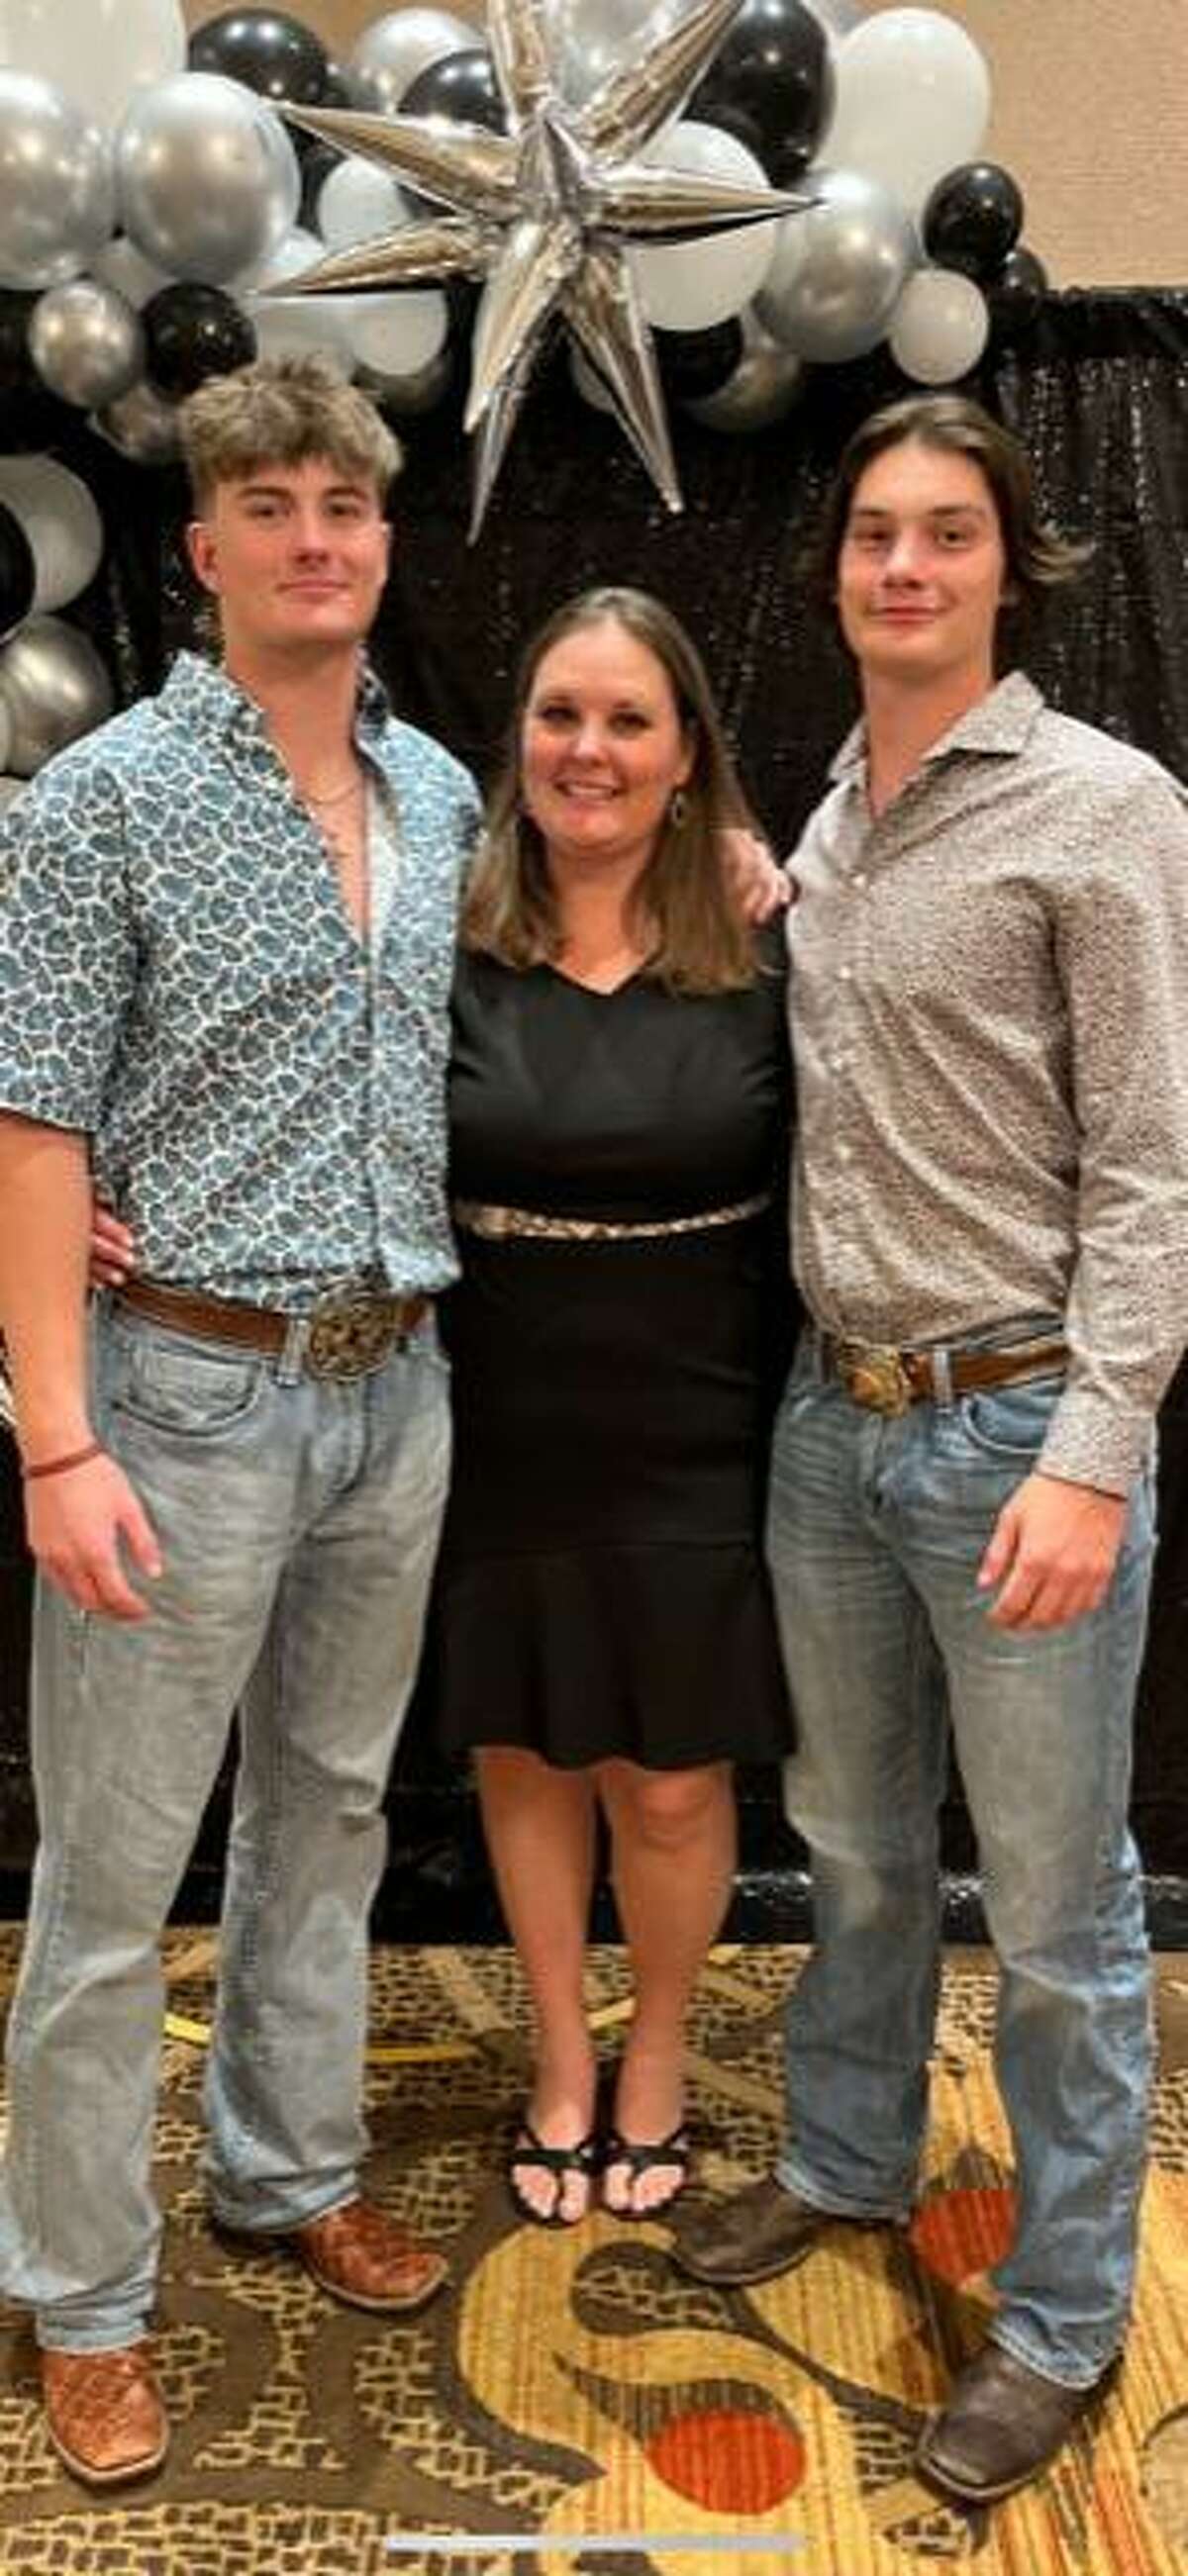 Tara Faith, sixth grade math teacher at Roberts Middle School and track coach at Leaman Junior High School in Lamar CISD, poses with her sons.